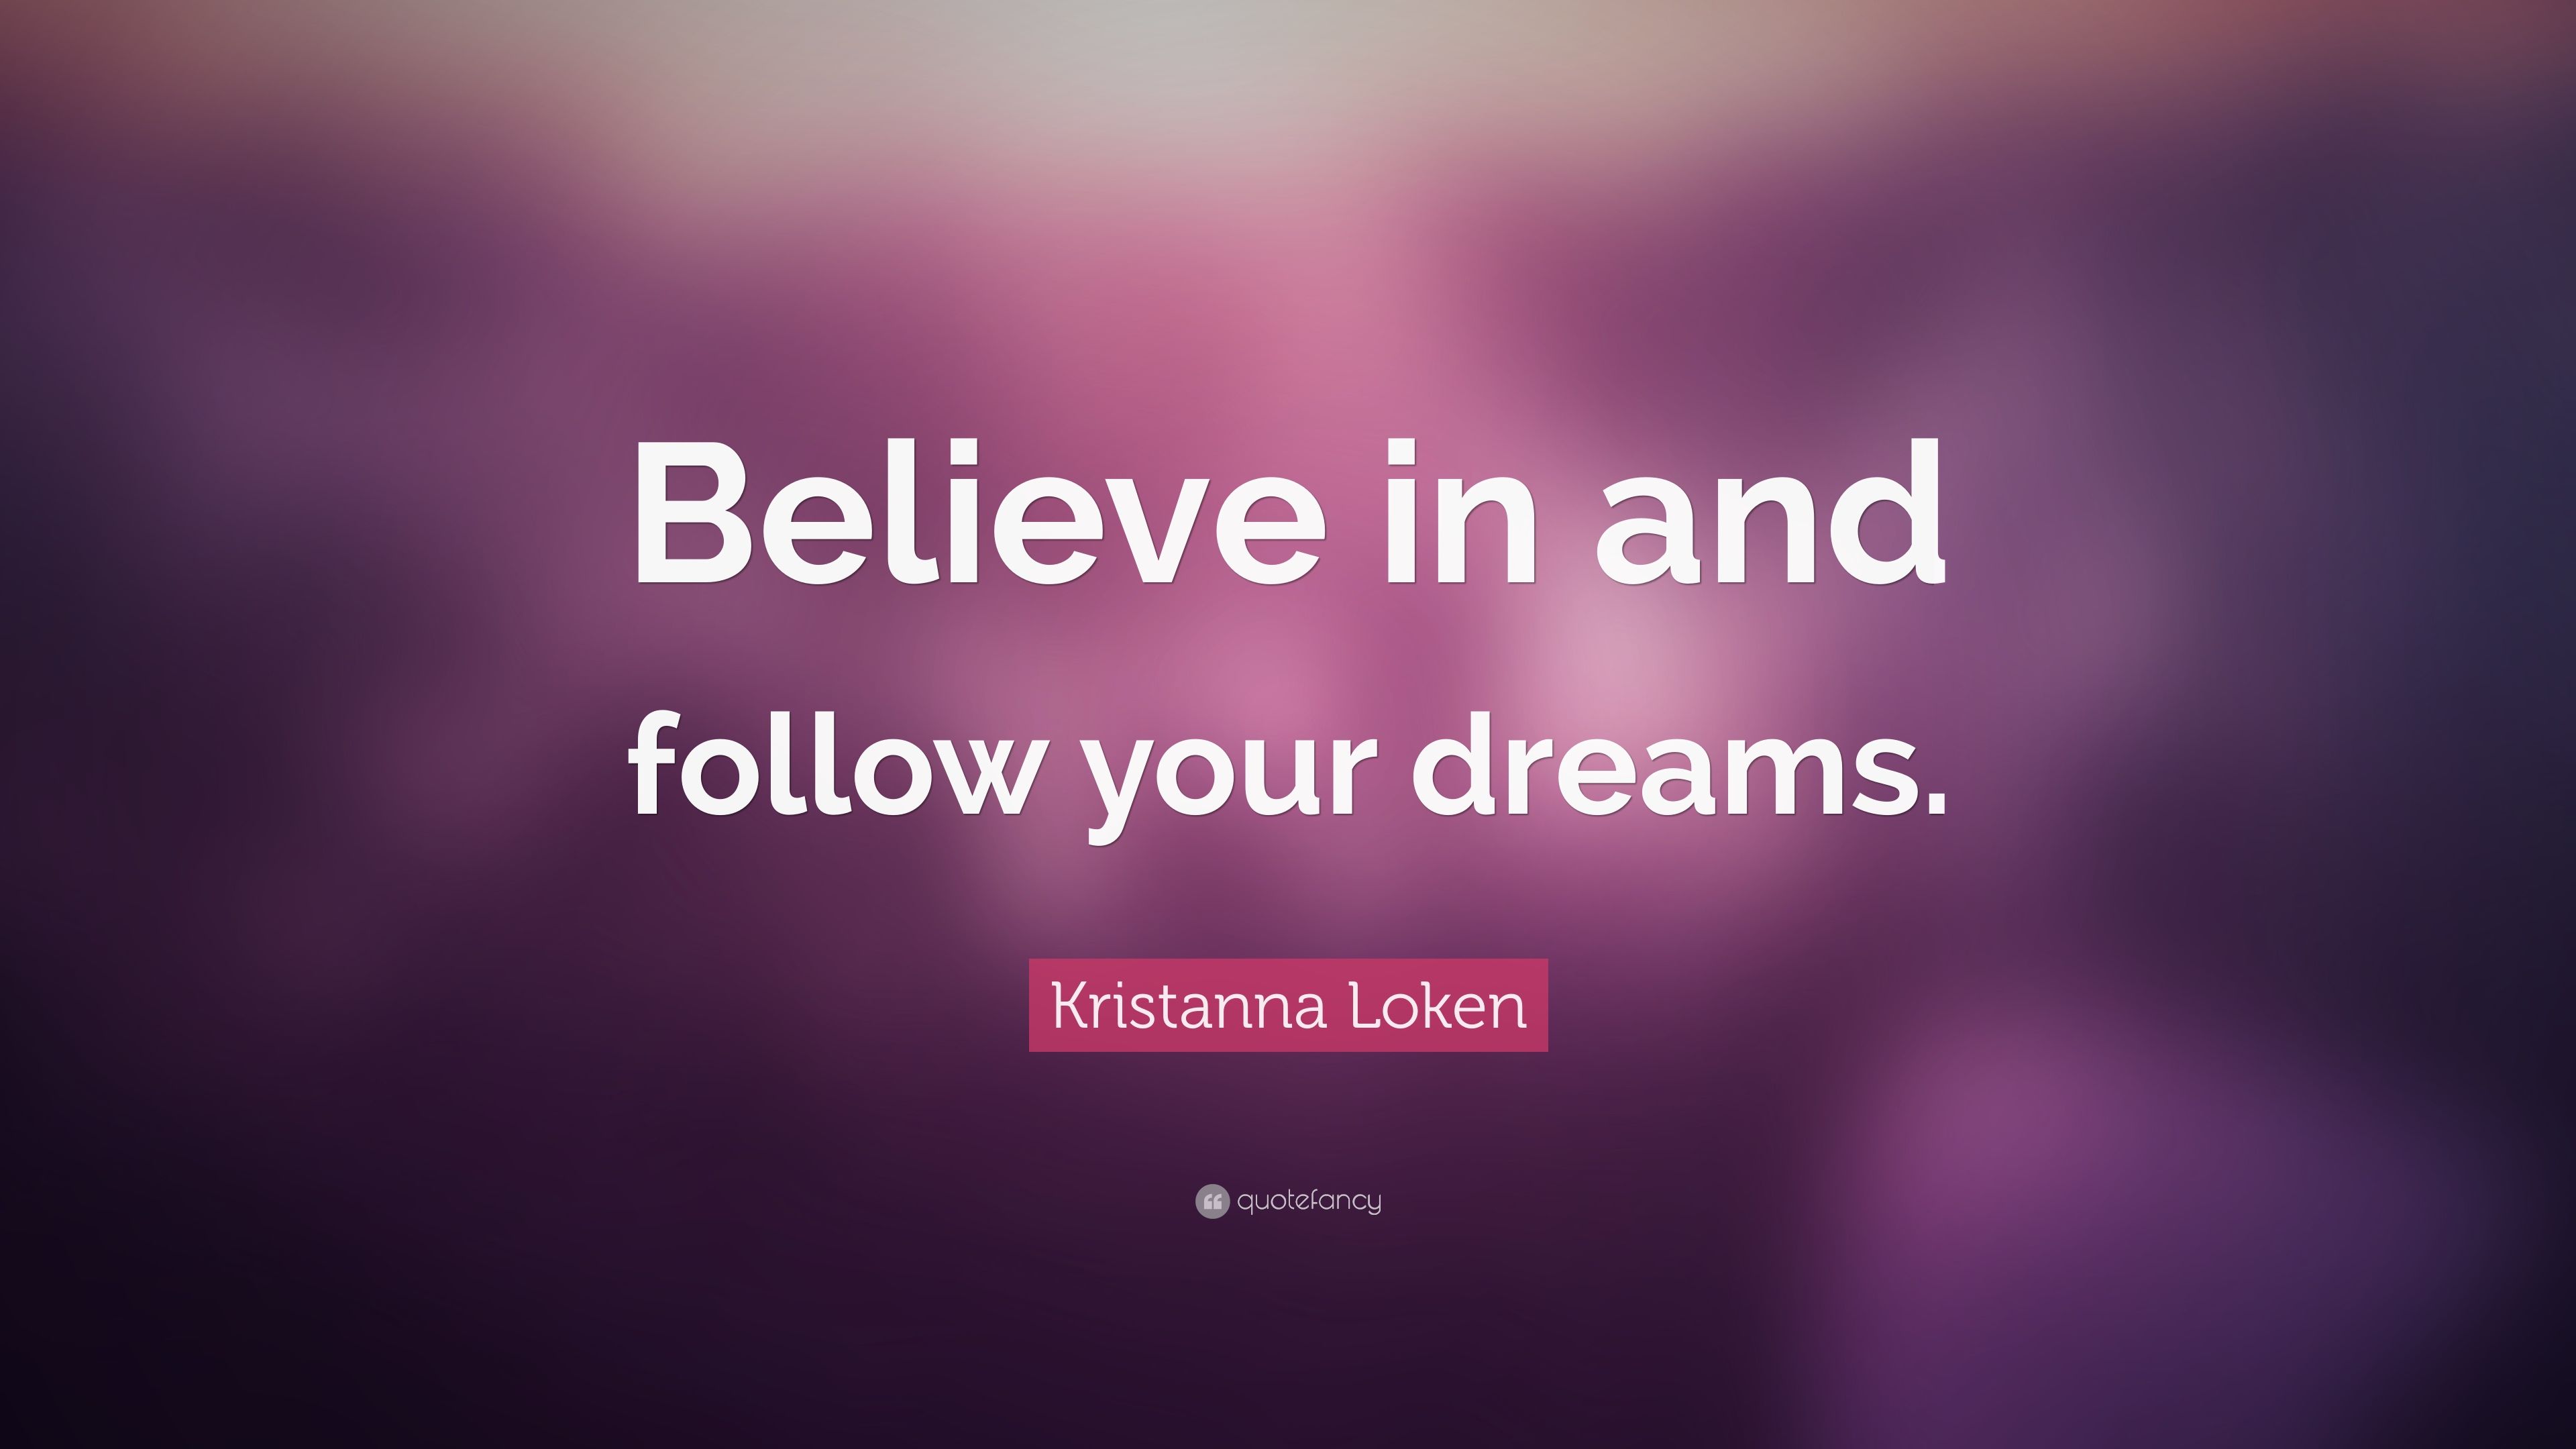 Kristanna Loken Quote: “Believe in and follow your dreams.” (10 wallpaper)